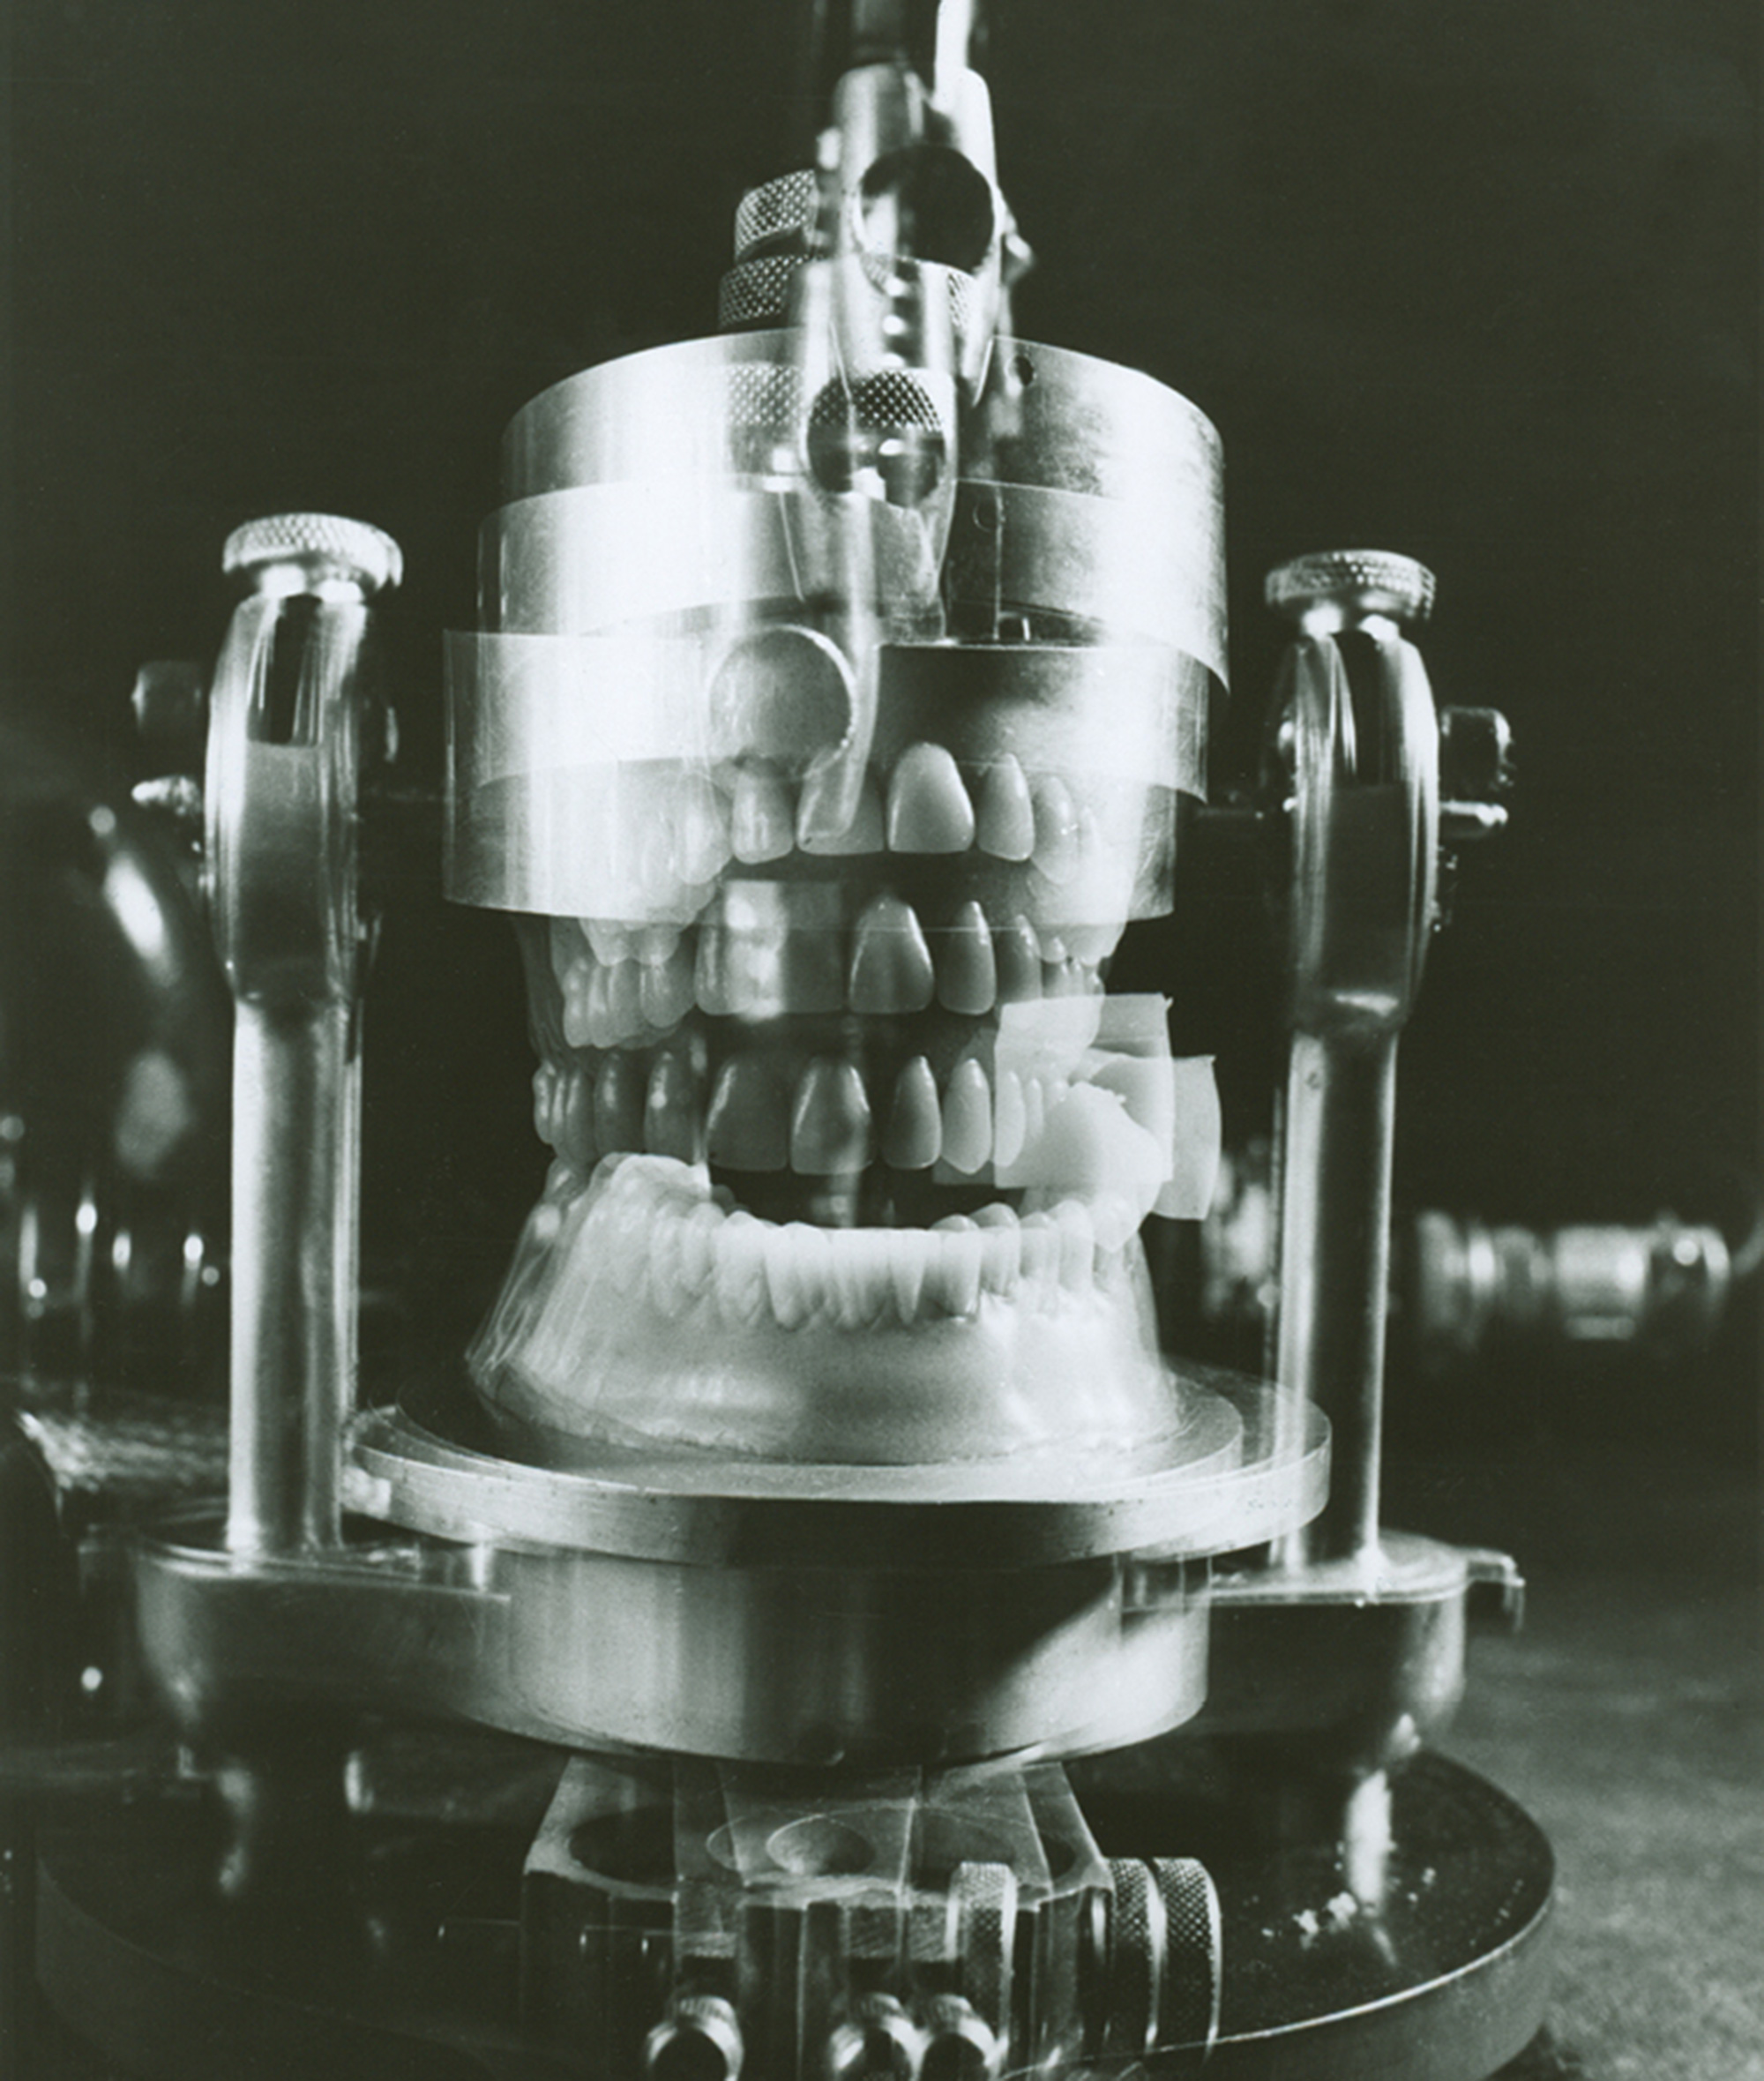 Strain Gage Denture Tenderometer munching away on a cube of mozzarella. From Life, 29 October 1956. Courtesy MIT Museum.